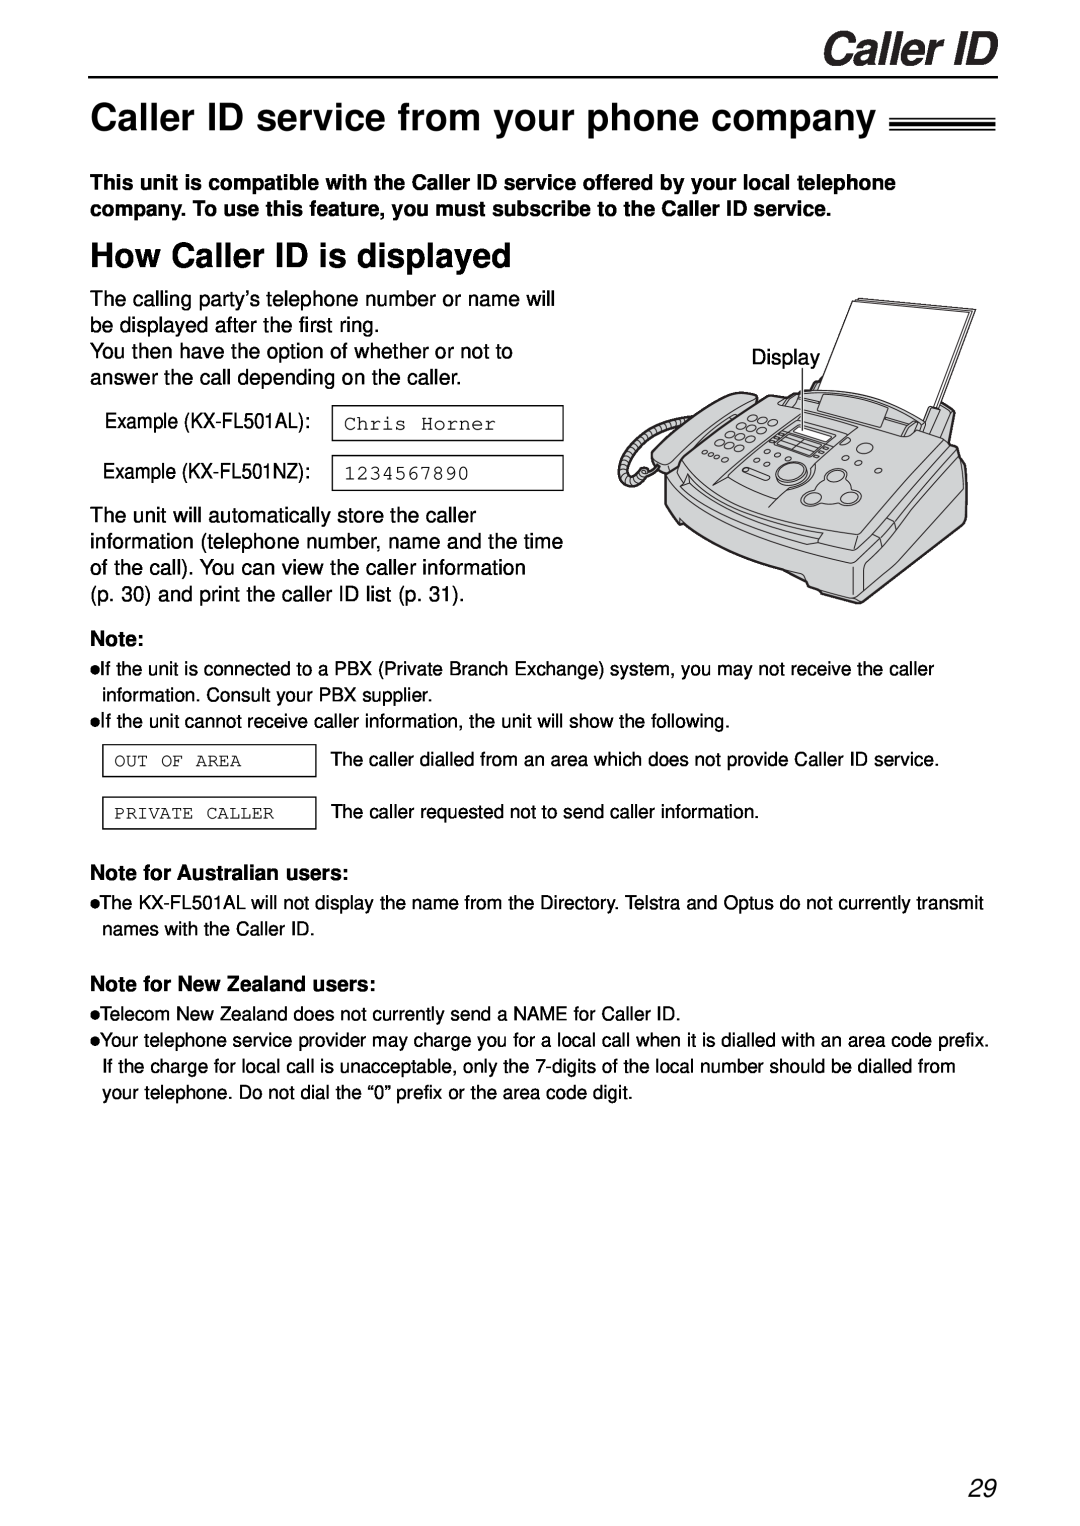 Panasonic KX-FL501NZ Caller ID service from your phone company, How Caller ID is displayed, Note for Australian users 